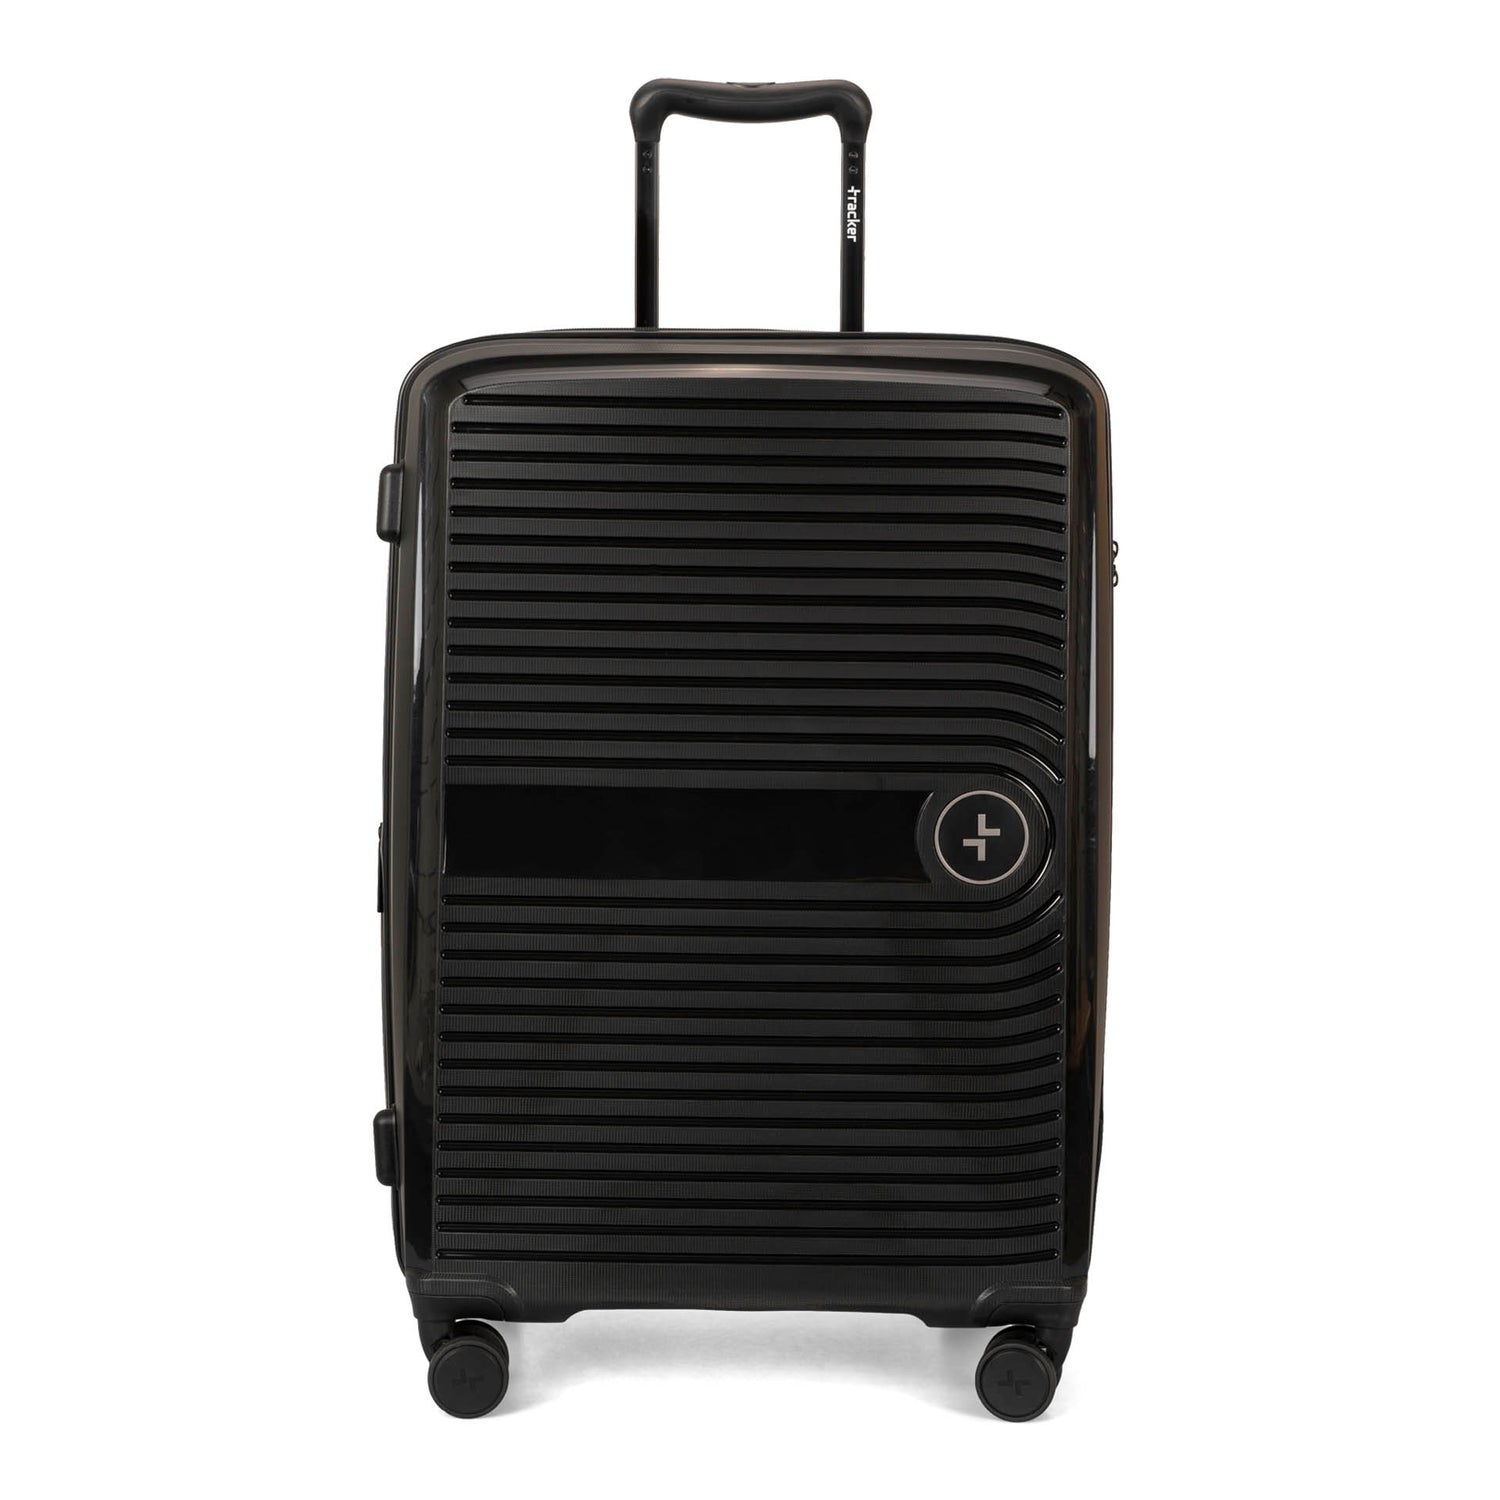 Front side of a black luggage called Dynamo designed by Tracker showing its telescopic handle, lined-pattern shell, and tracker symbol embossed on the front.